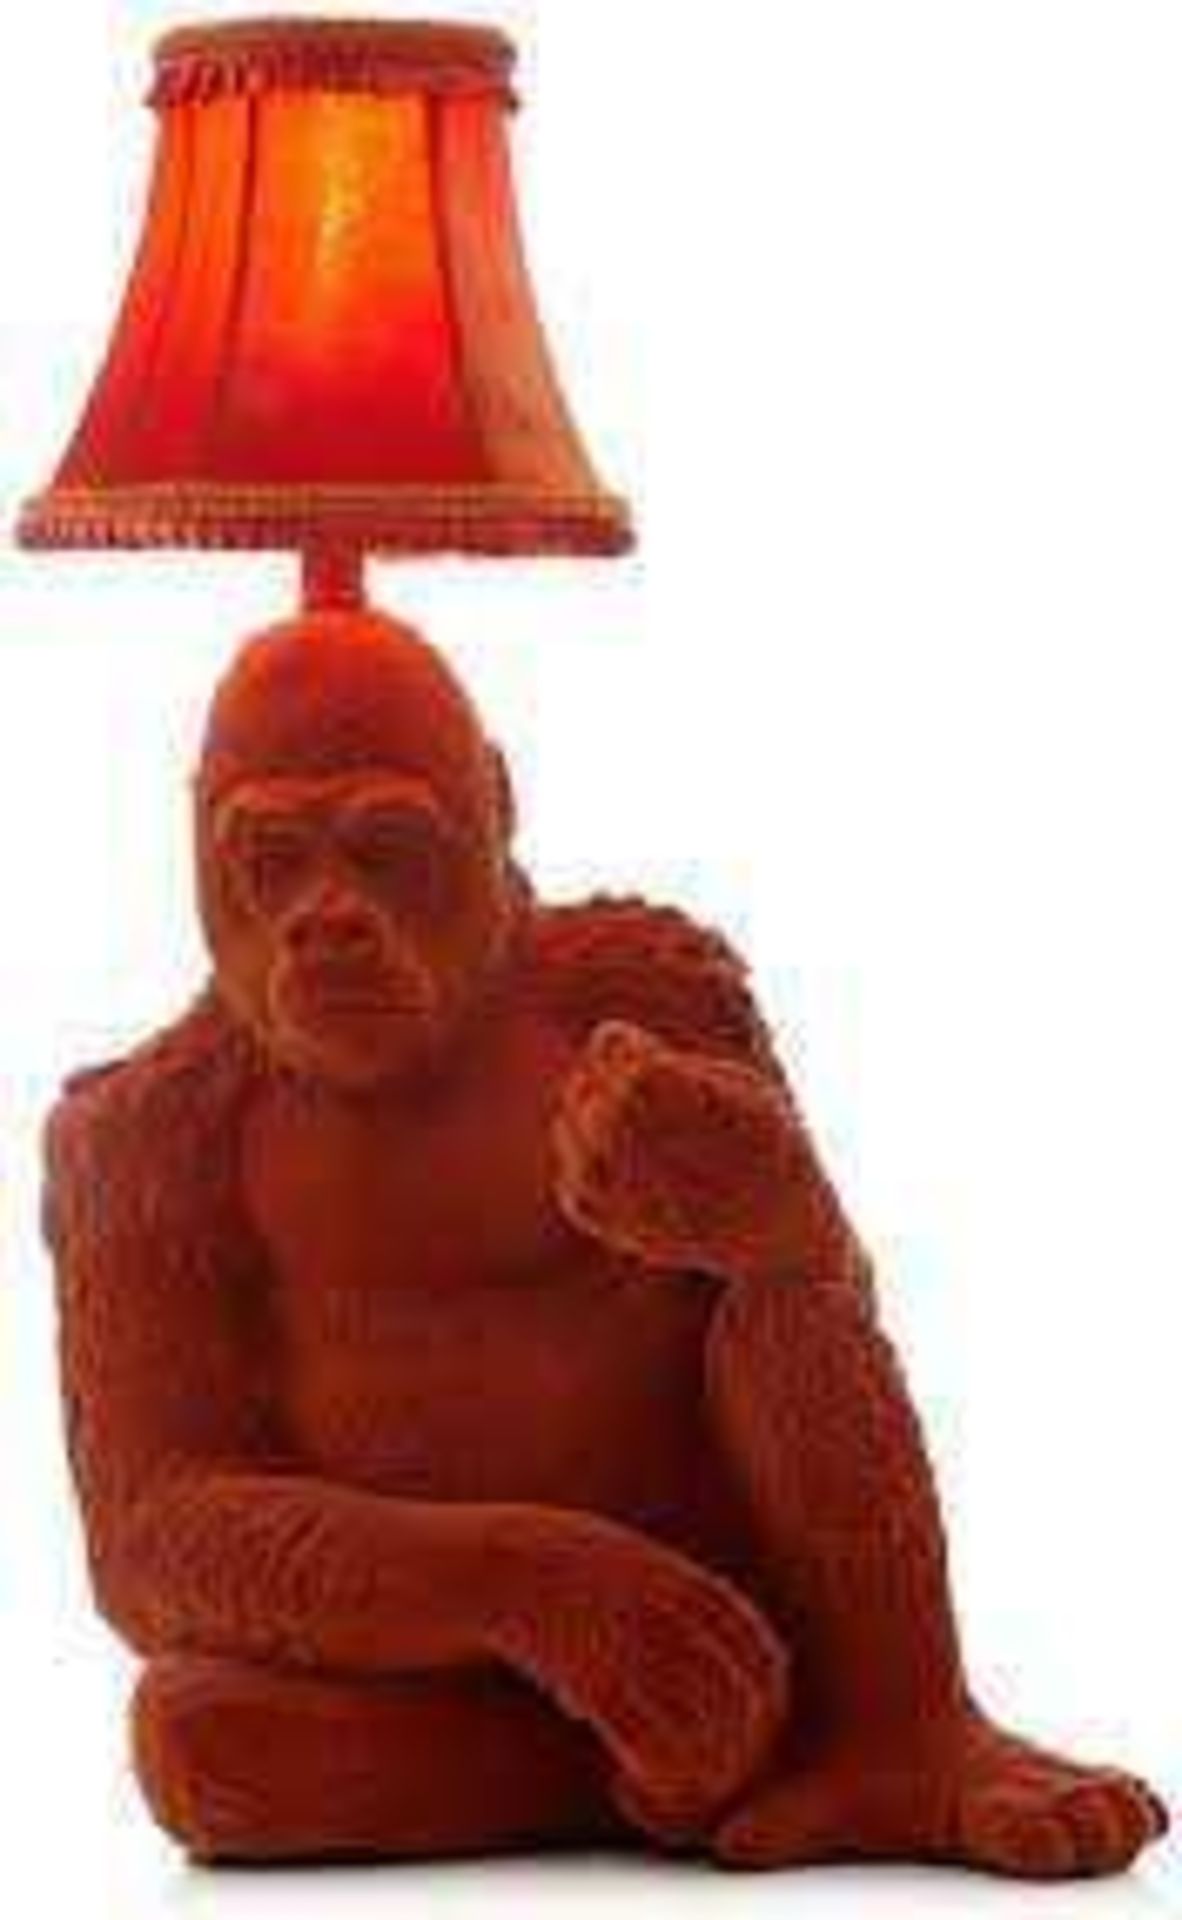 RRP £95 Unboxed Abigail Ahern Gorilla Lamp Untested